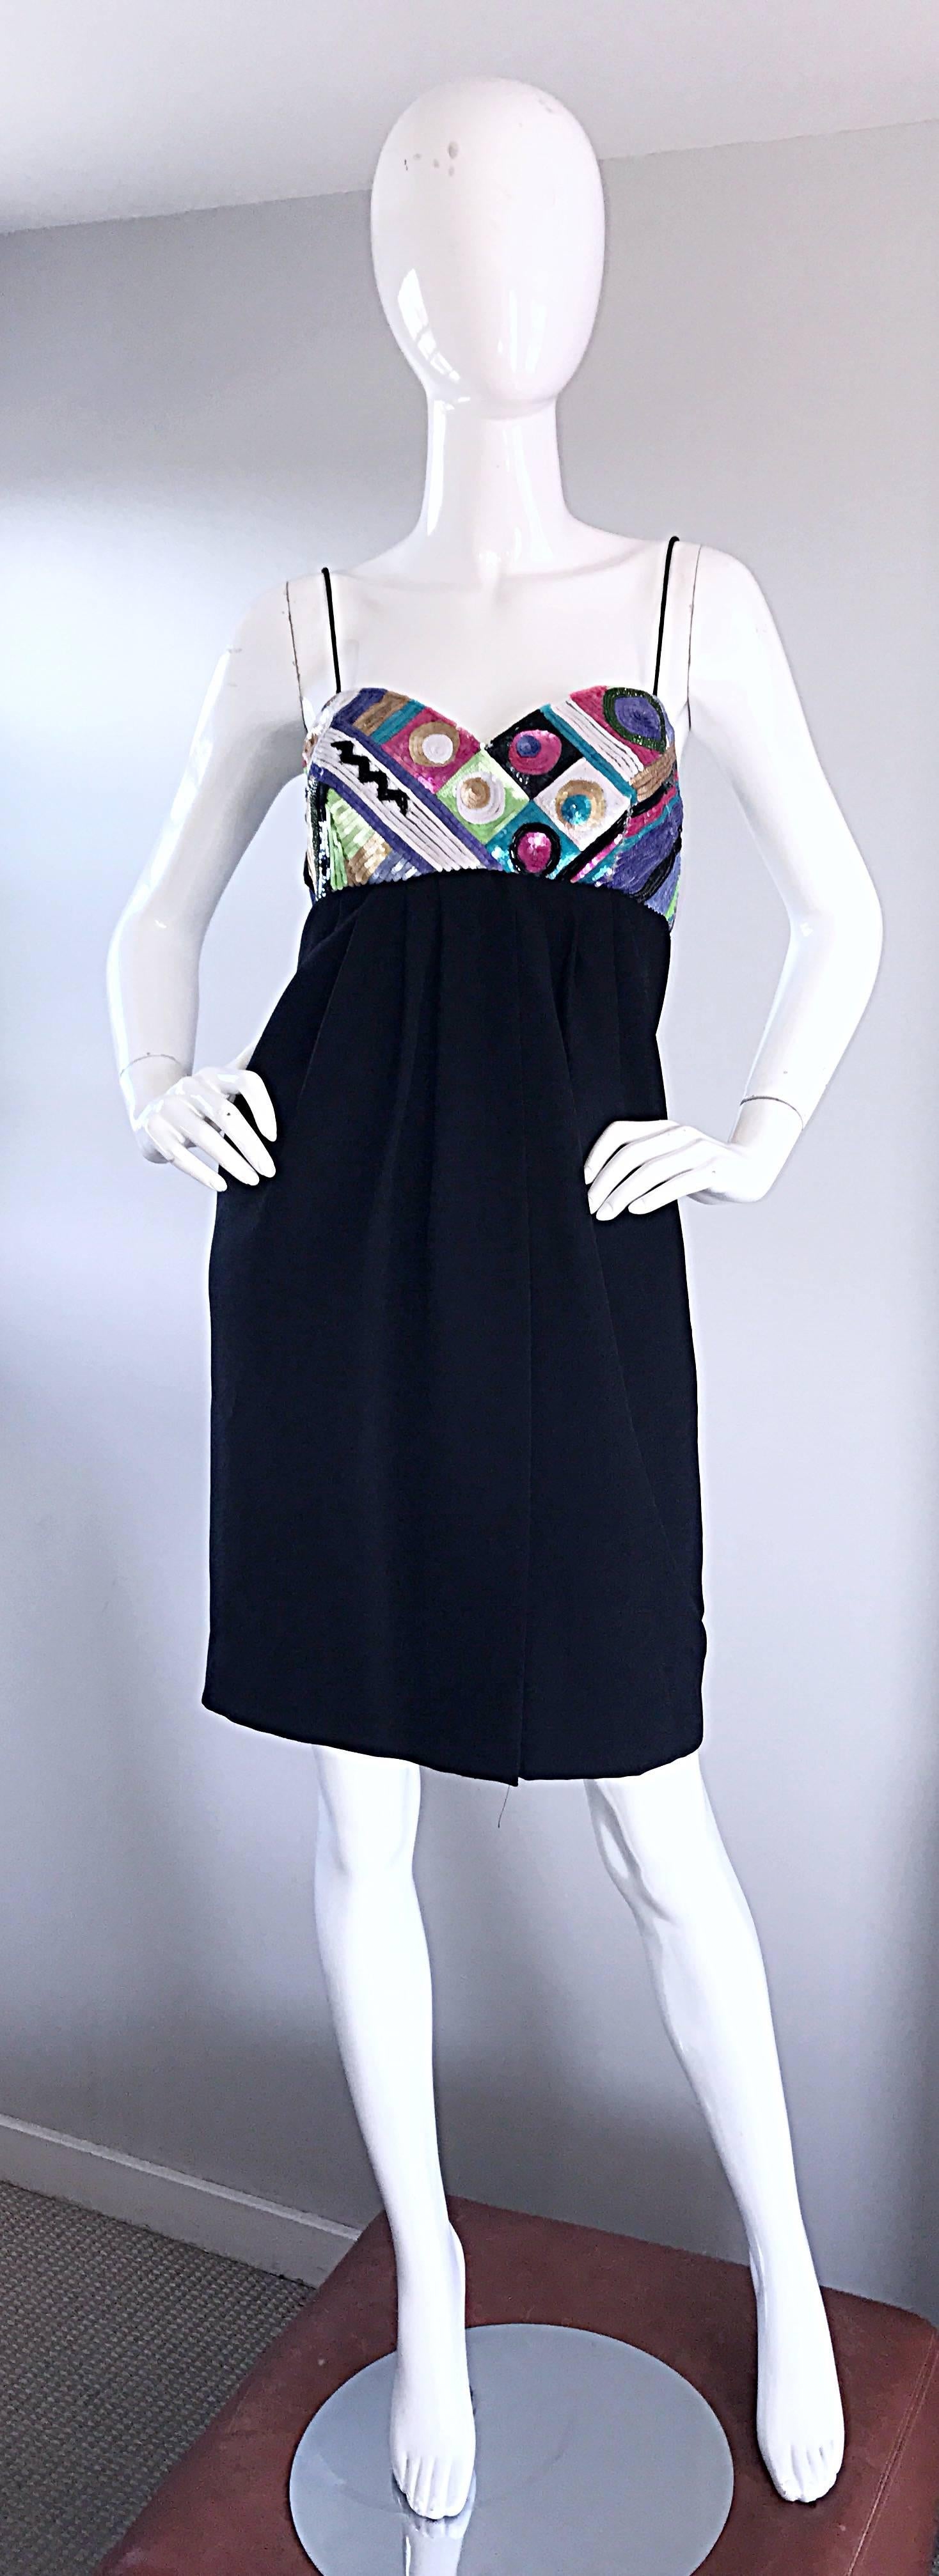 Chic vintage early 1990s LIYIZ black crepe and sequin babydoll empire dress! Flattering high empire waist is very forgiving. Thousands of hand-sewn colorful sequins on the bodice in geometric shapes. Intricate pleating detail on the skirt. Hidden